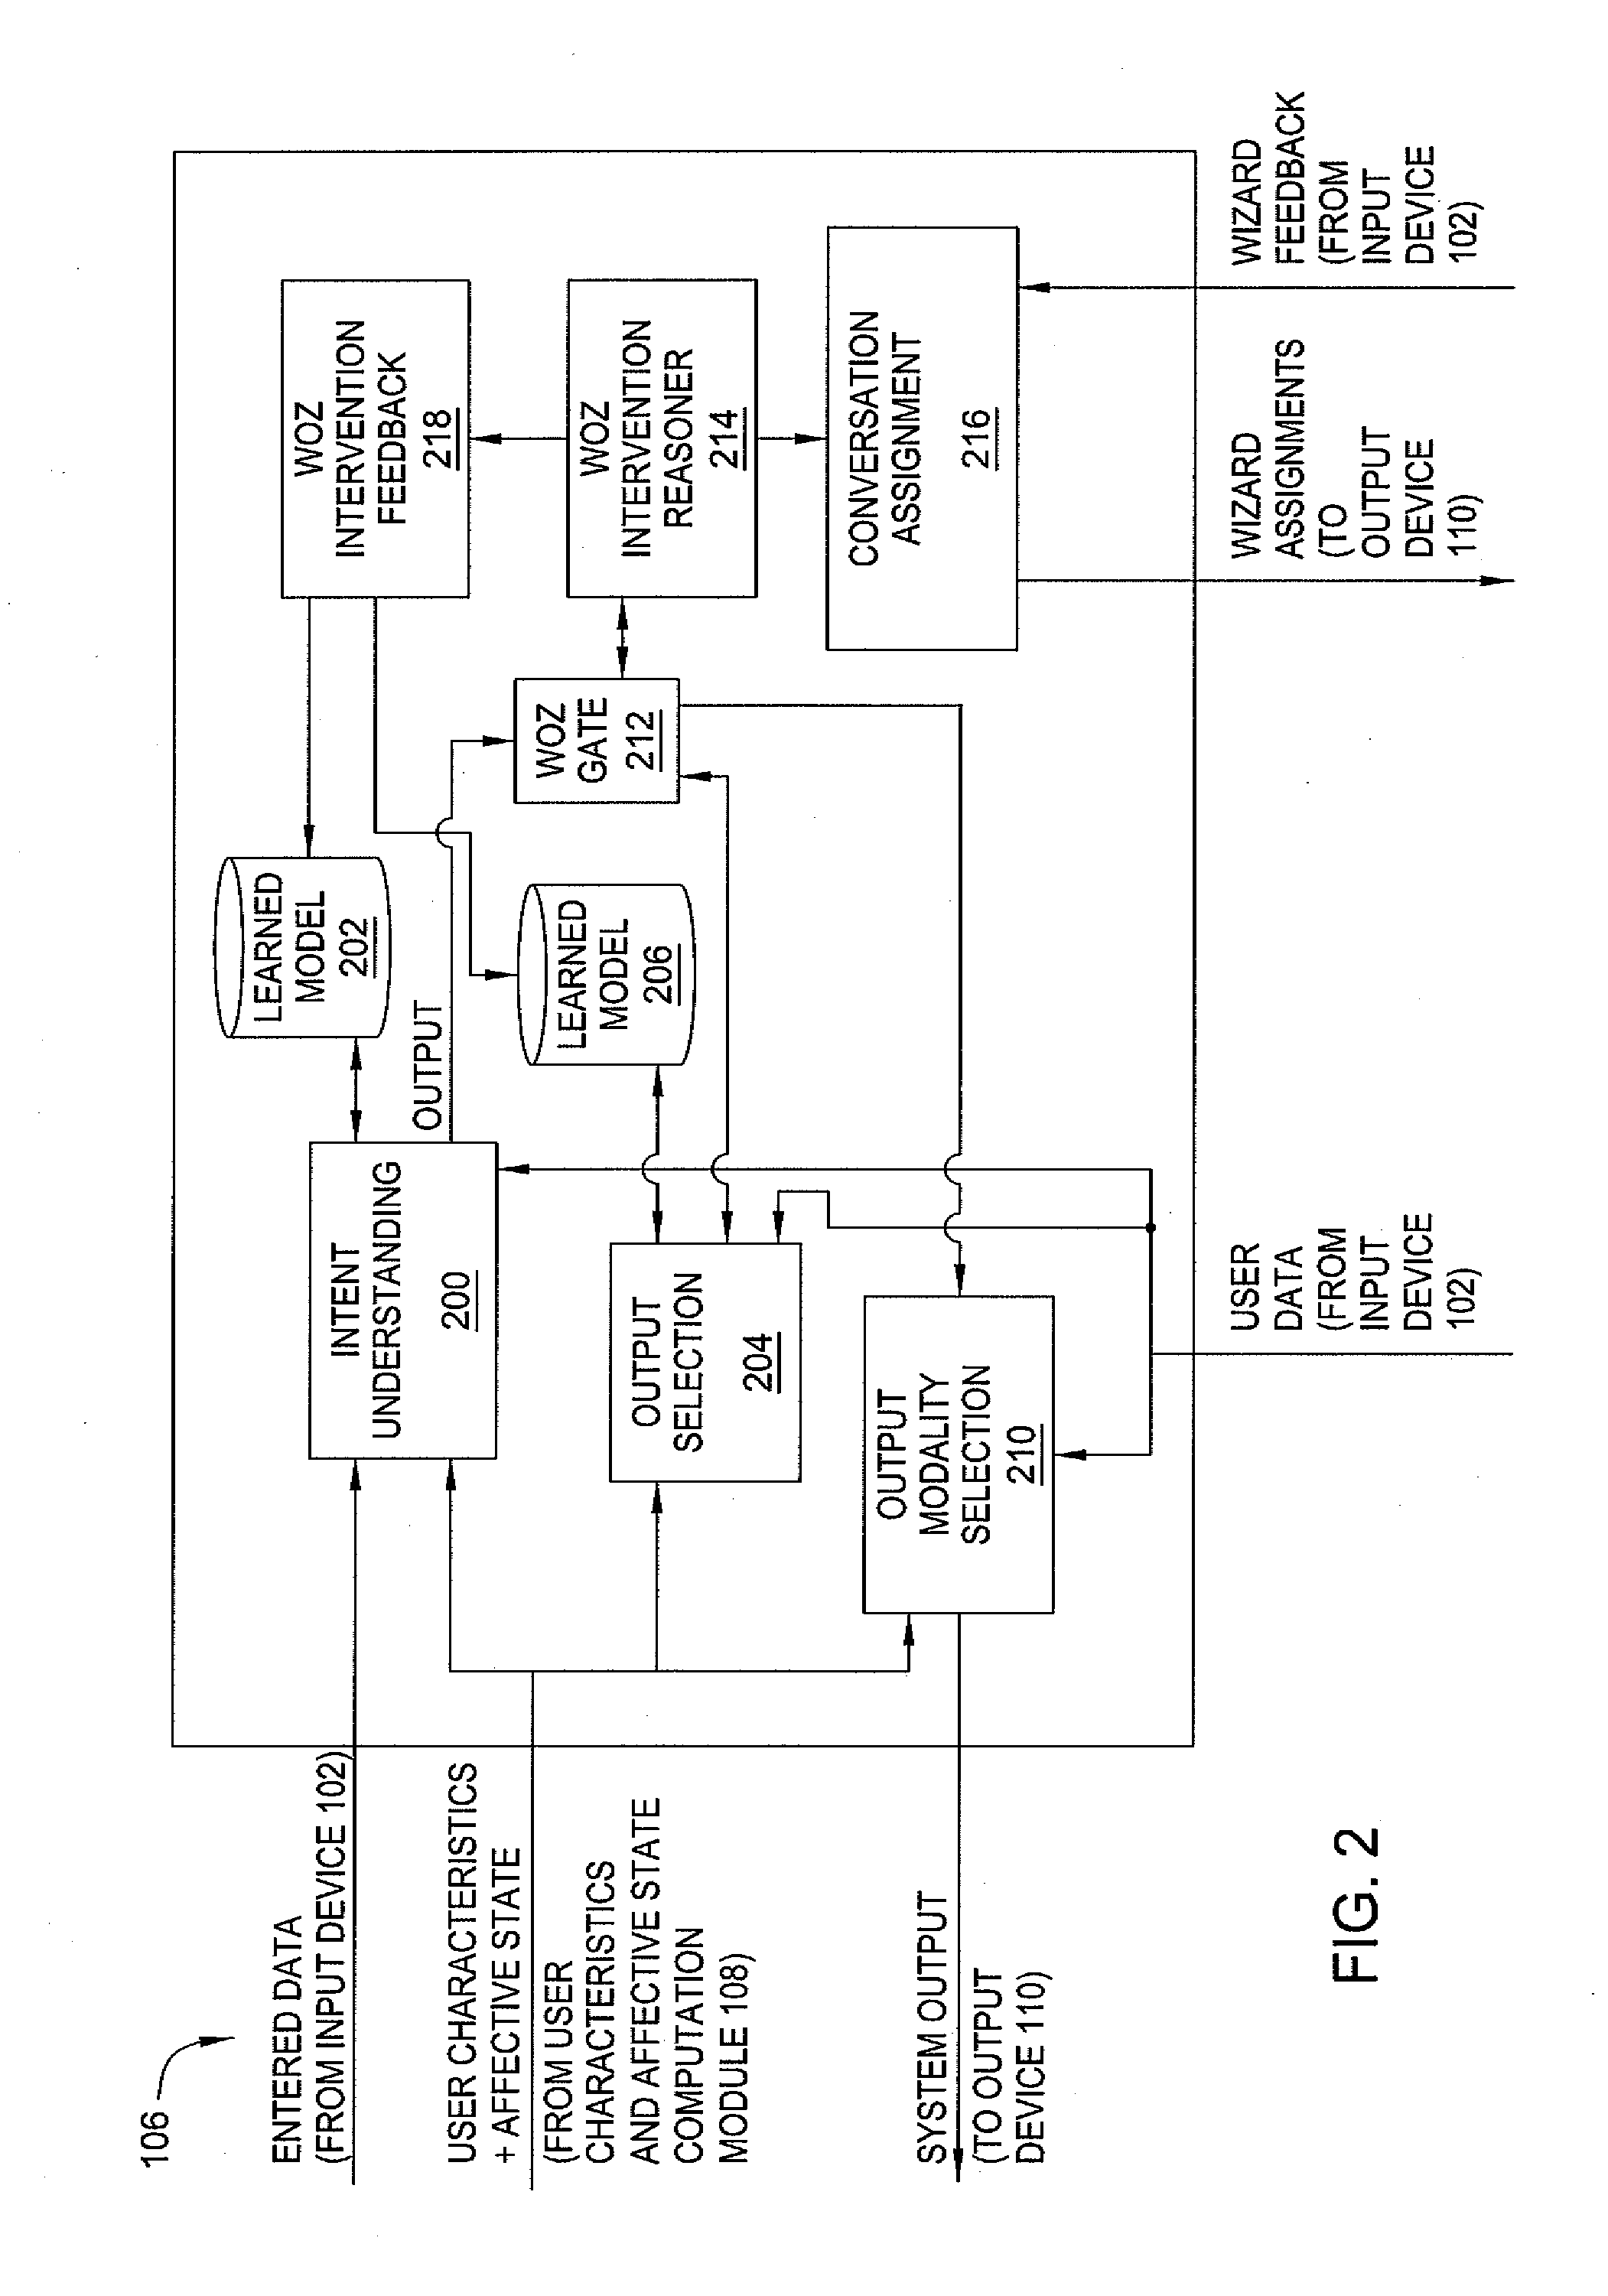 Method and apparatus for exploiting human feedback in an intelligent automated assistant